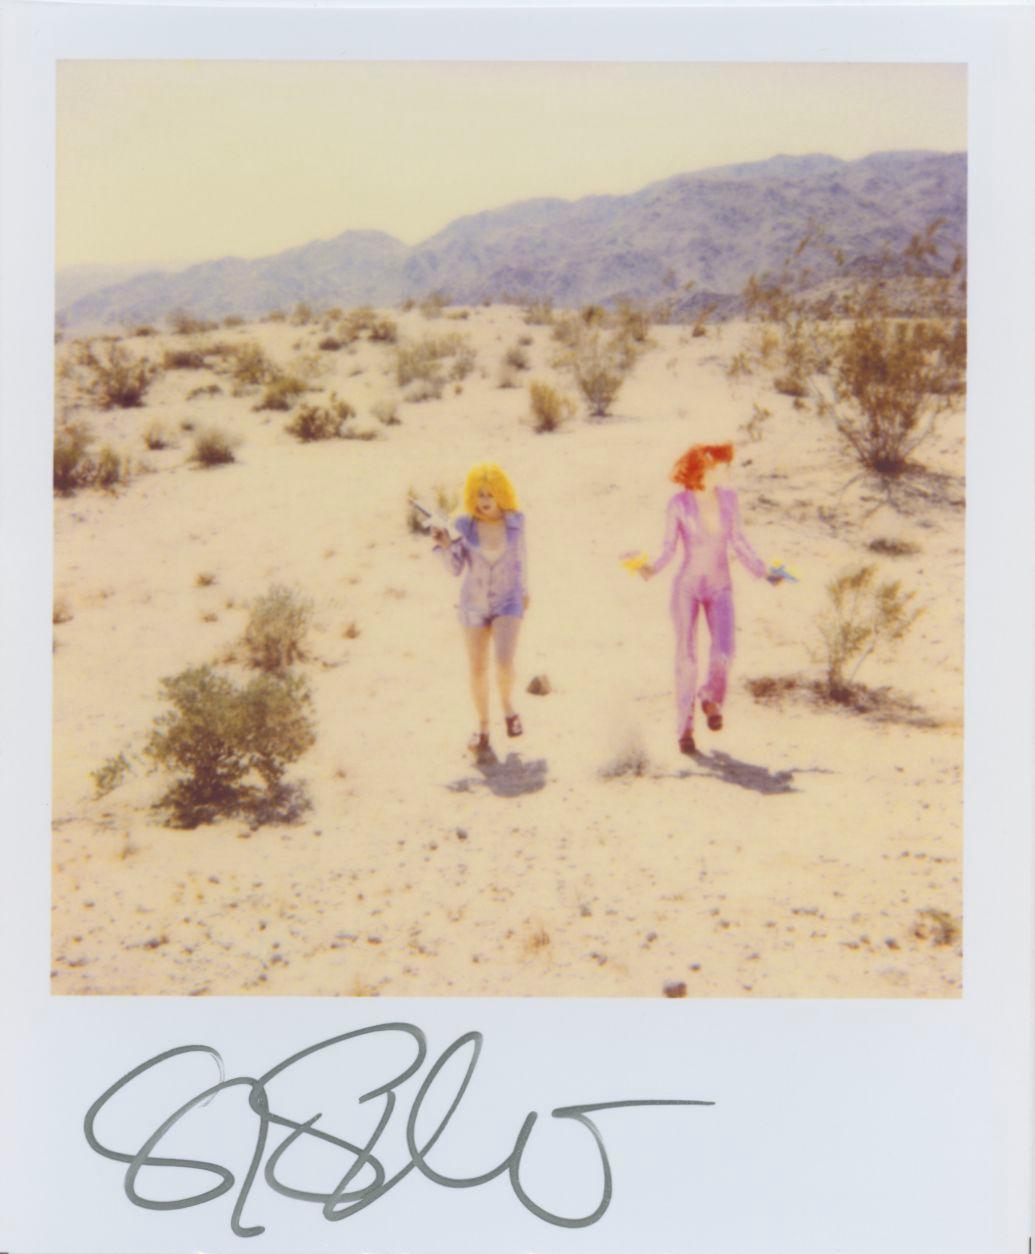 Stefanie Schneider Polaroid-sized unlimited Mini 'Running with Guns' - 1999 - 

signed in front, not mounted. 
1 Digital Color Photographs based on a Polaroid. 

Polaroid sized open Editions 1999-2016
10.7 x 8.8cm (Image 7.9x7.7cm) each.

Stefanie